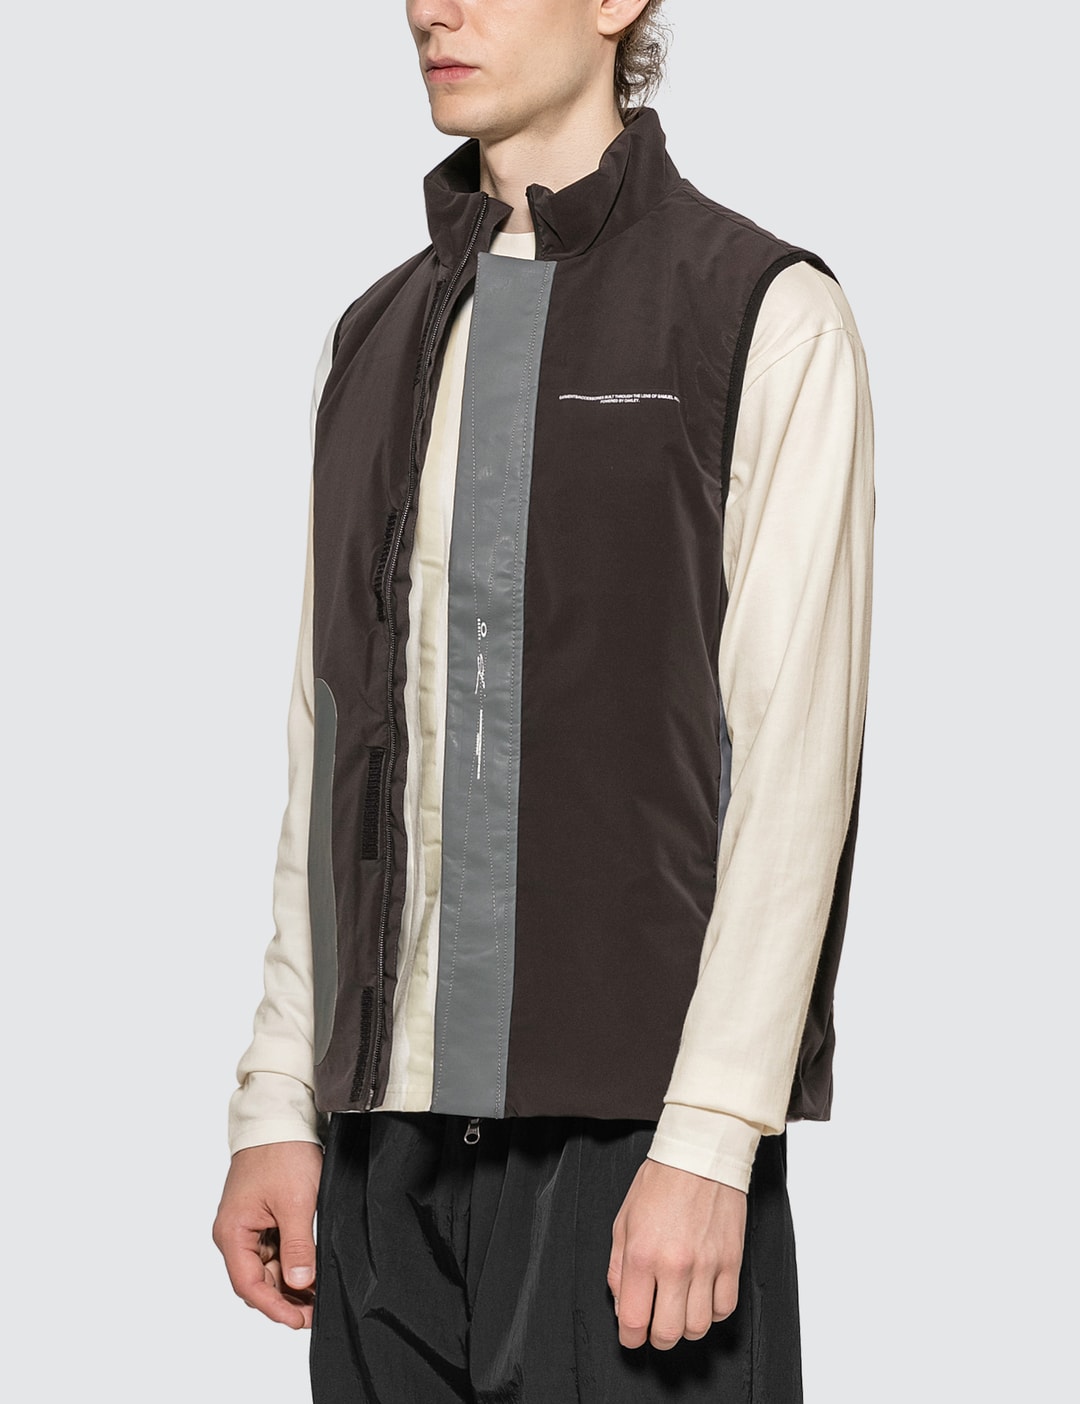 Oakley by Samuel Ross - Nylon Pocket Vest | HBX - Globally Curated Fashion  and Lifestyle by Hypebeast